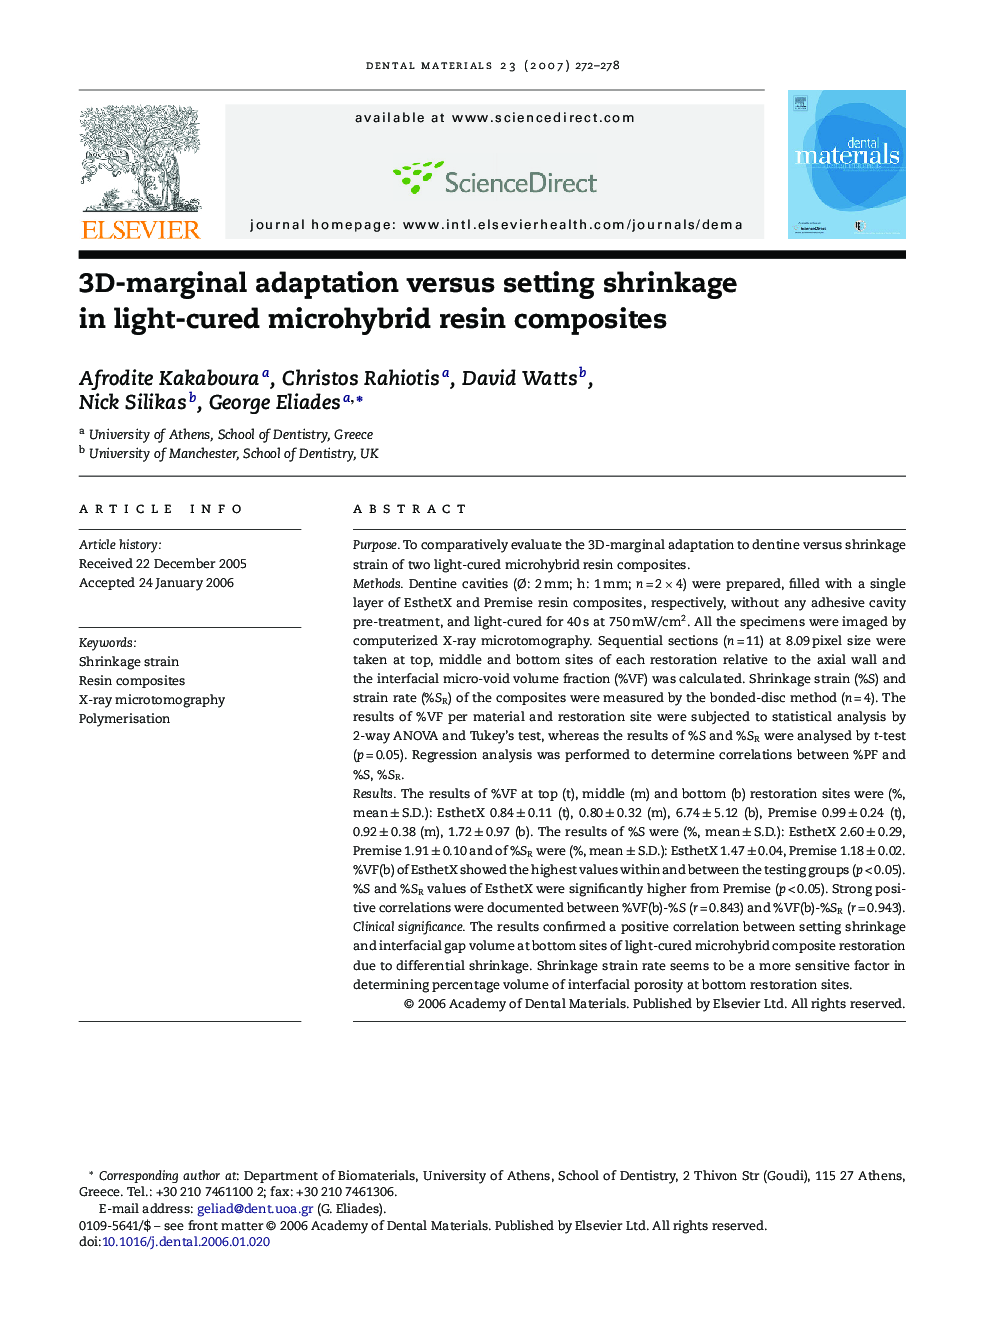 3D-marginal adaptation versus setting shrinkage in light-cured microhybrid resin composites